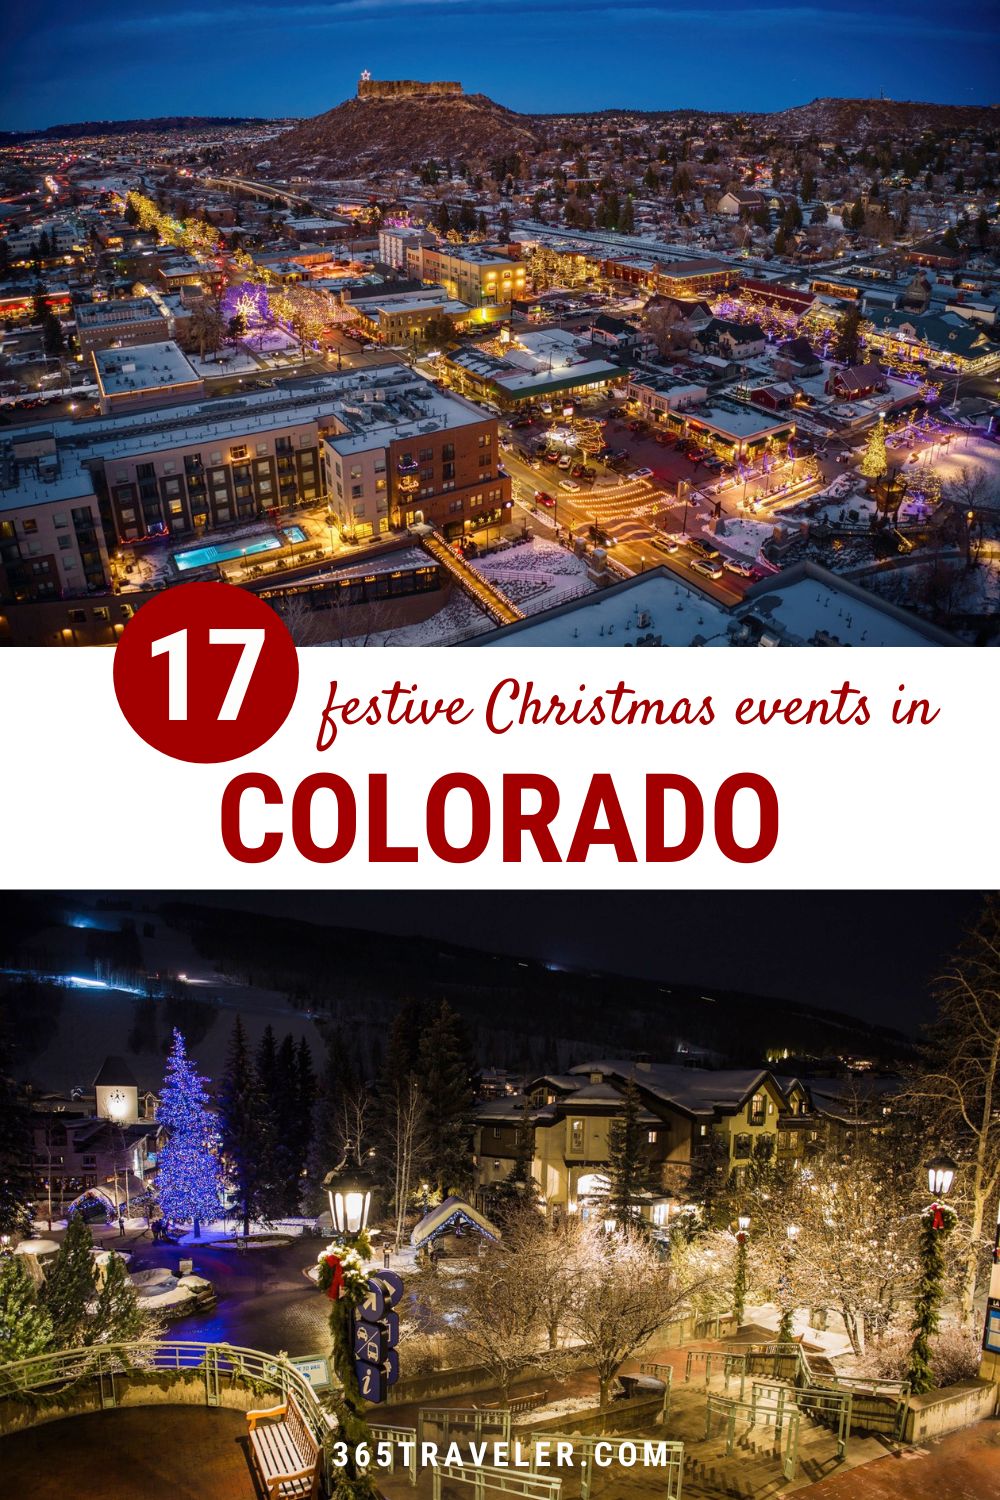 17 Festive Ways To Have a Merry Christmas, Colorado Style